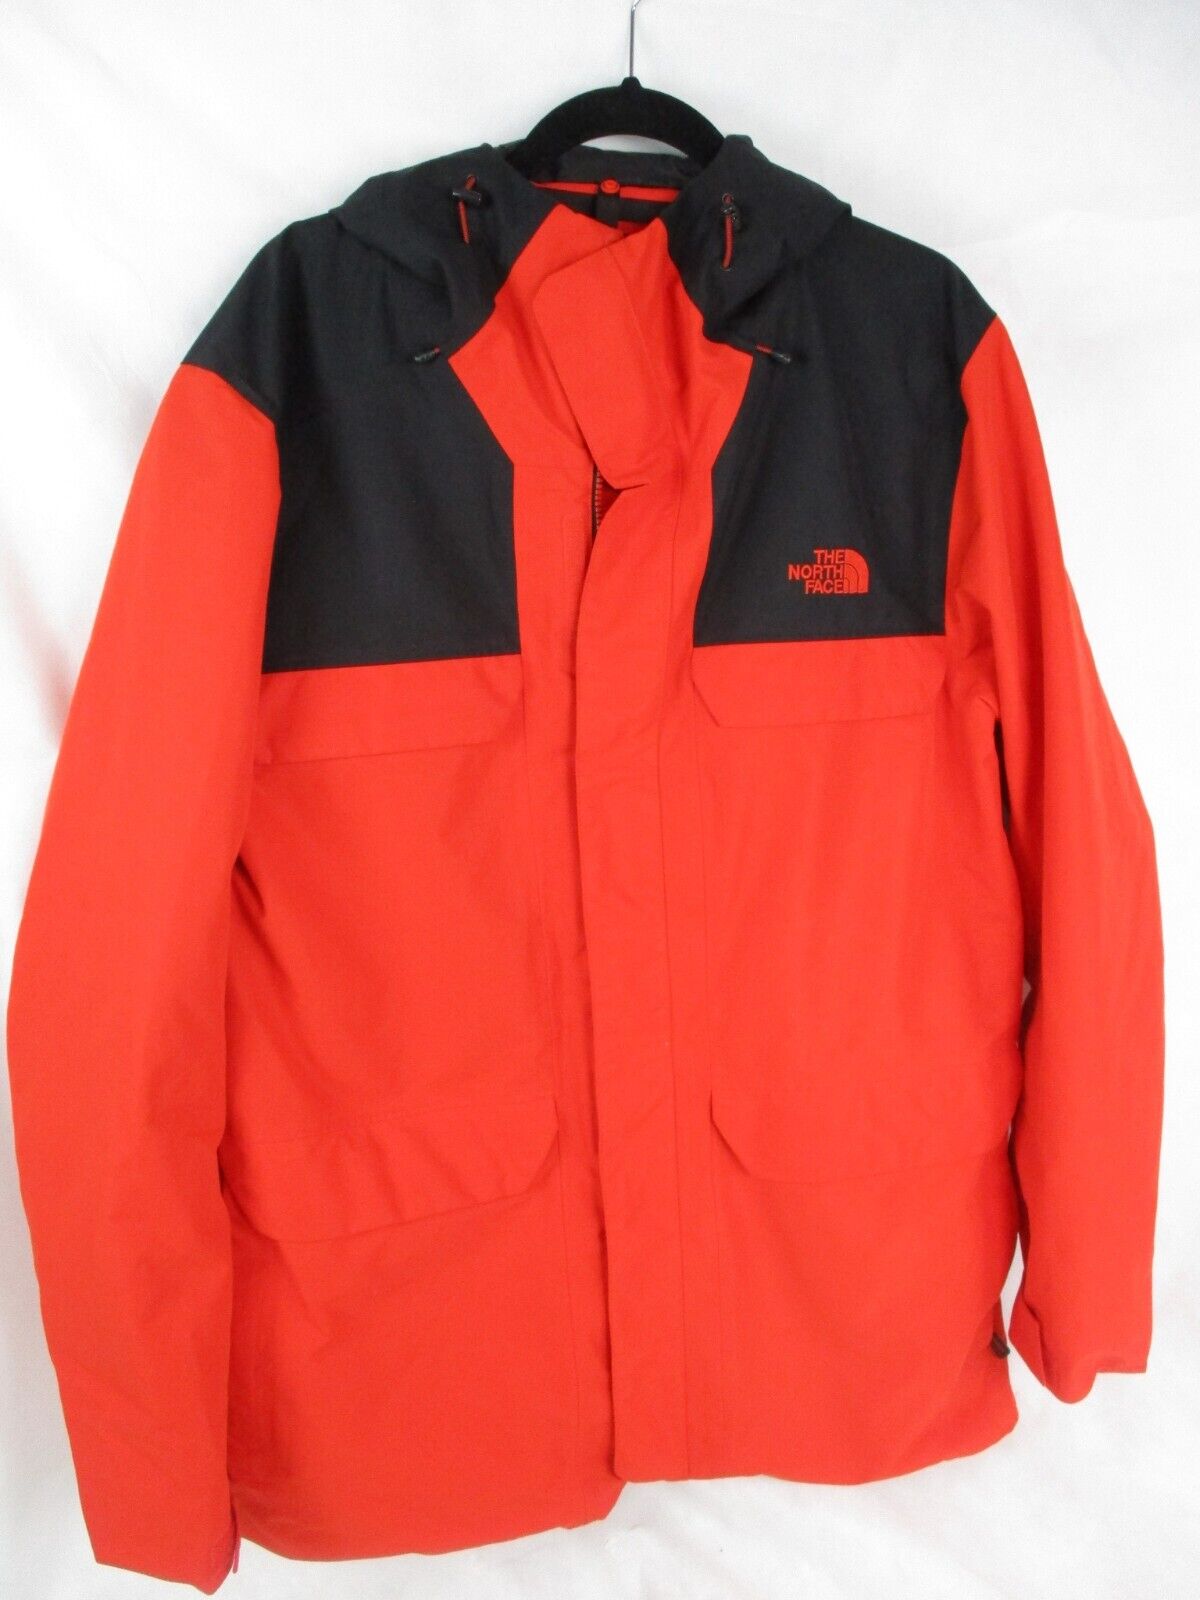 The North Face 1990 Mountain Style Jacket GTX Size XL Gore-Tex